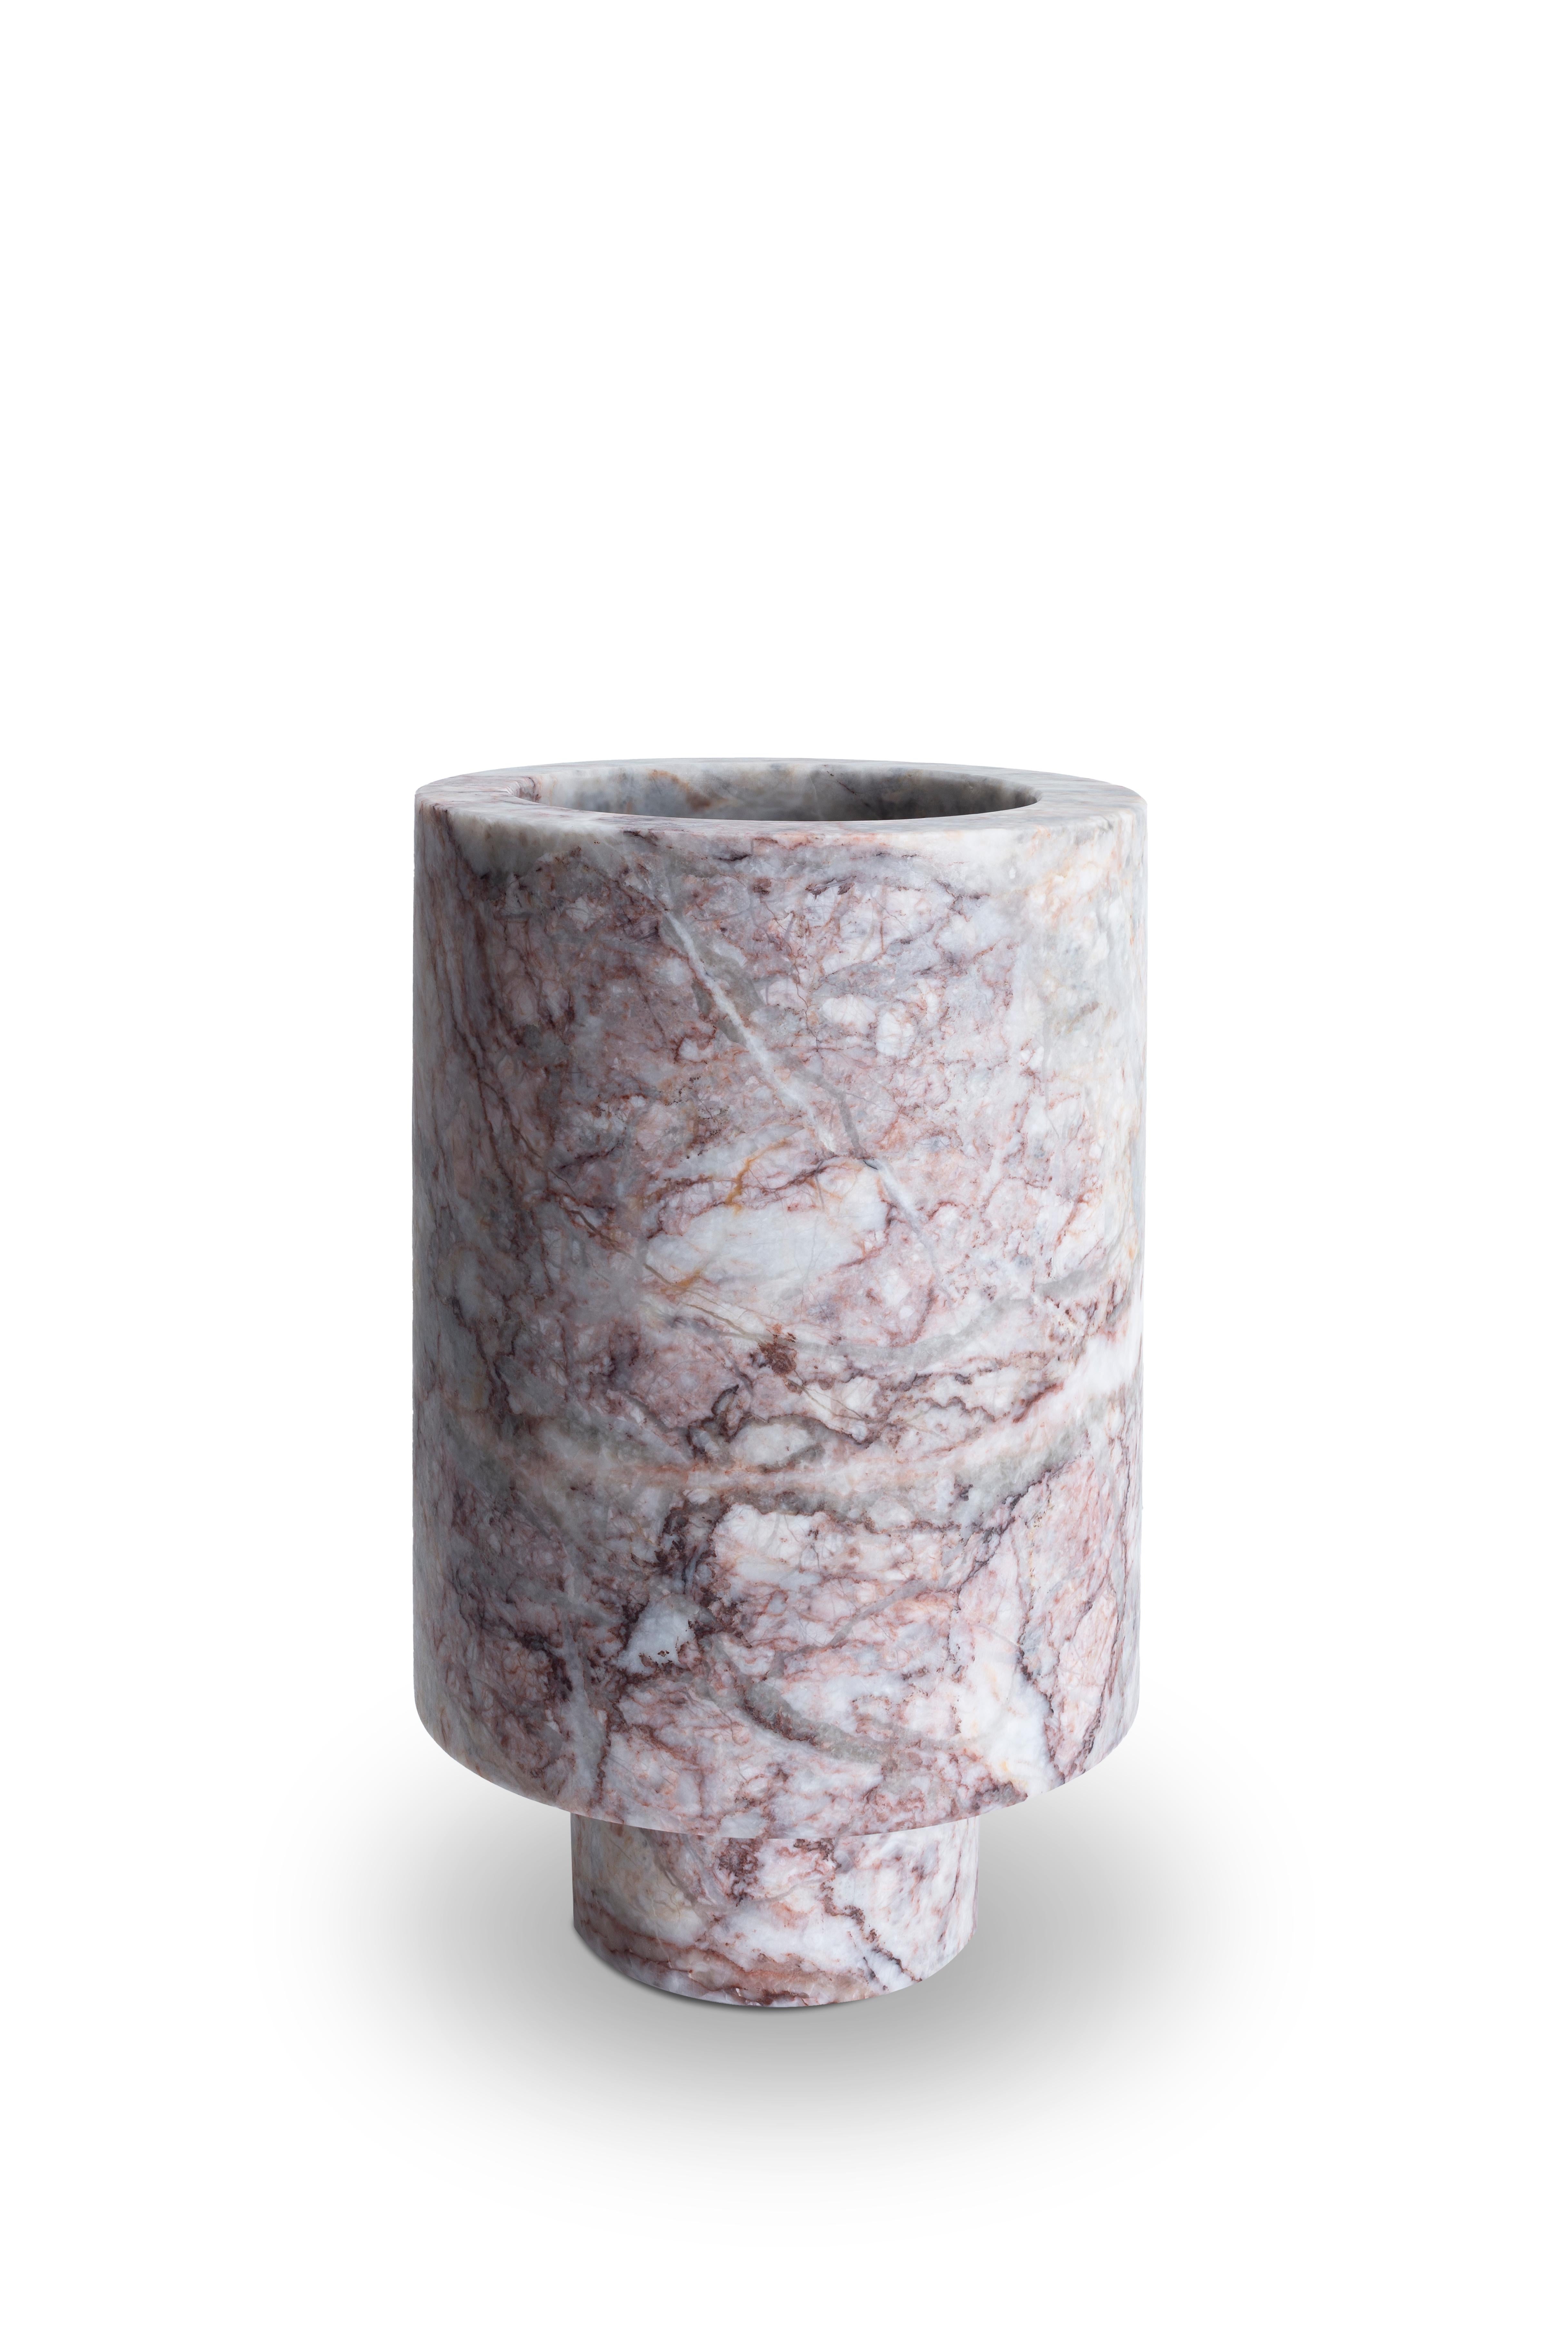 Fior Di Pesco Carnico Inside Out Vase by Karen Chekerdjian
Dimensions: Ø 14 x H 24 cm.
Materials: Fior Di Pesco Carnico Marble.

Handmade in Italy. Also available in different marble options. Please contact us. 

Karen’s trajectory into designing